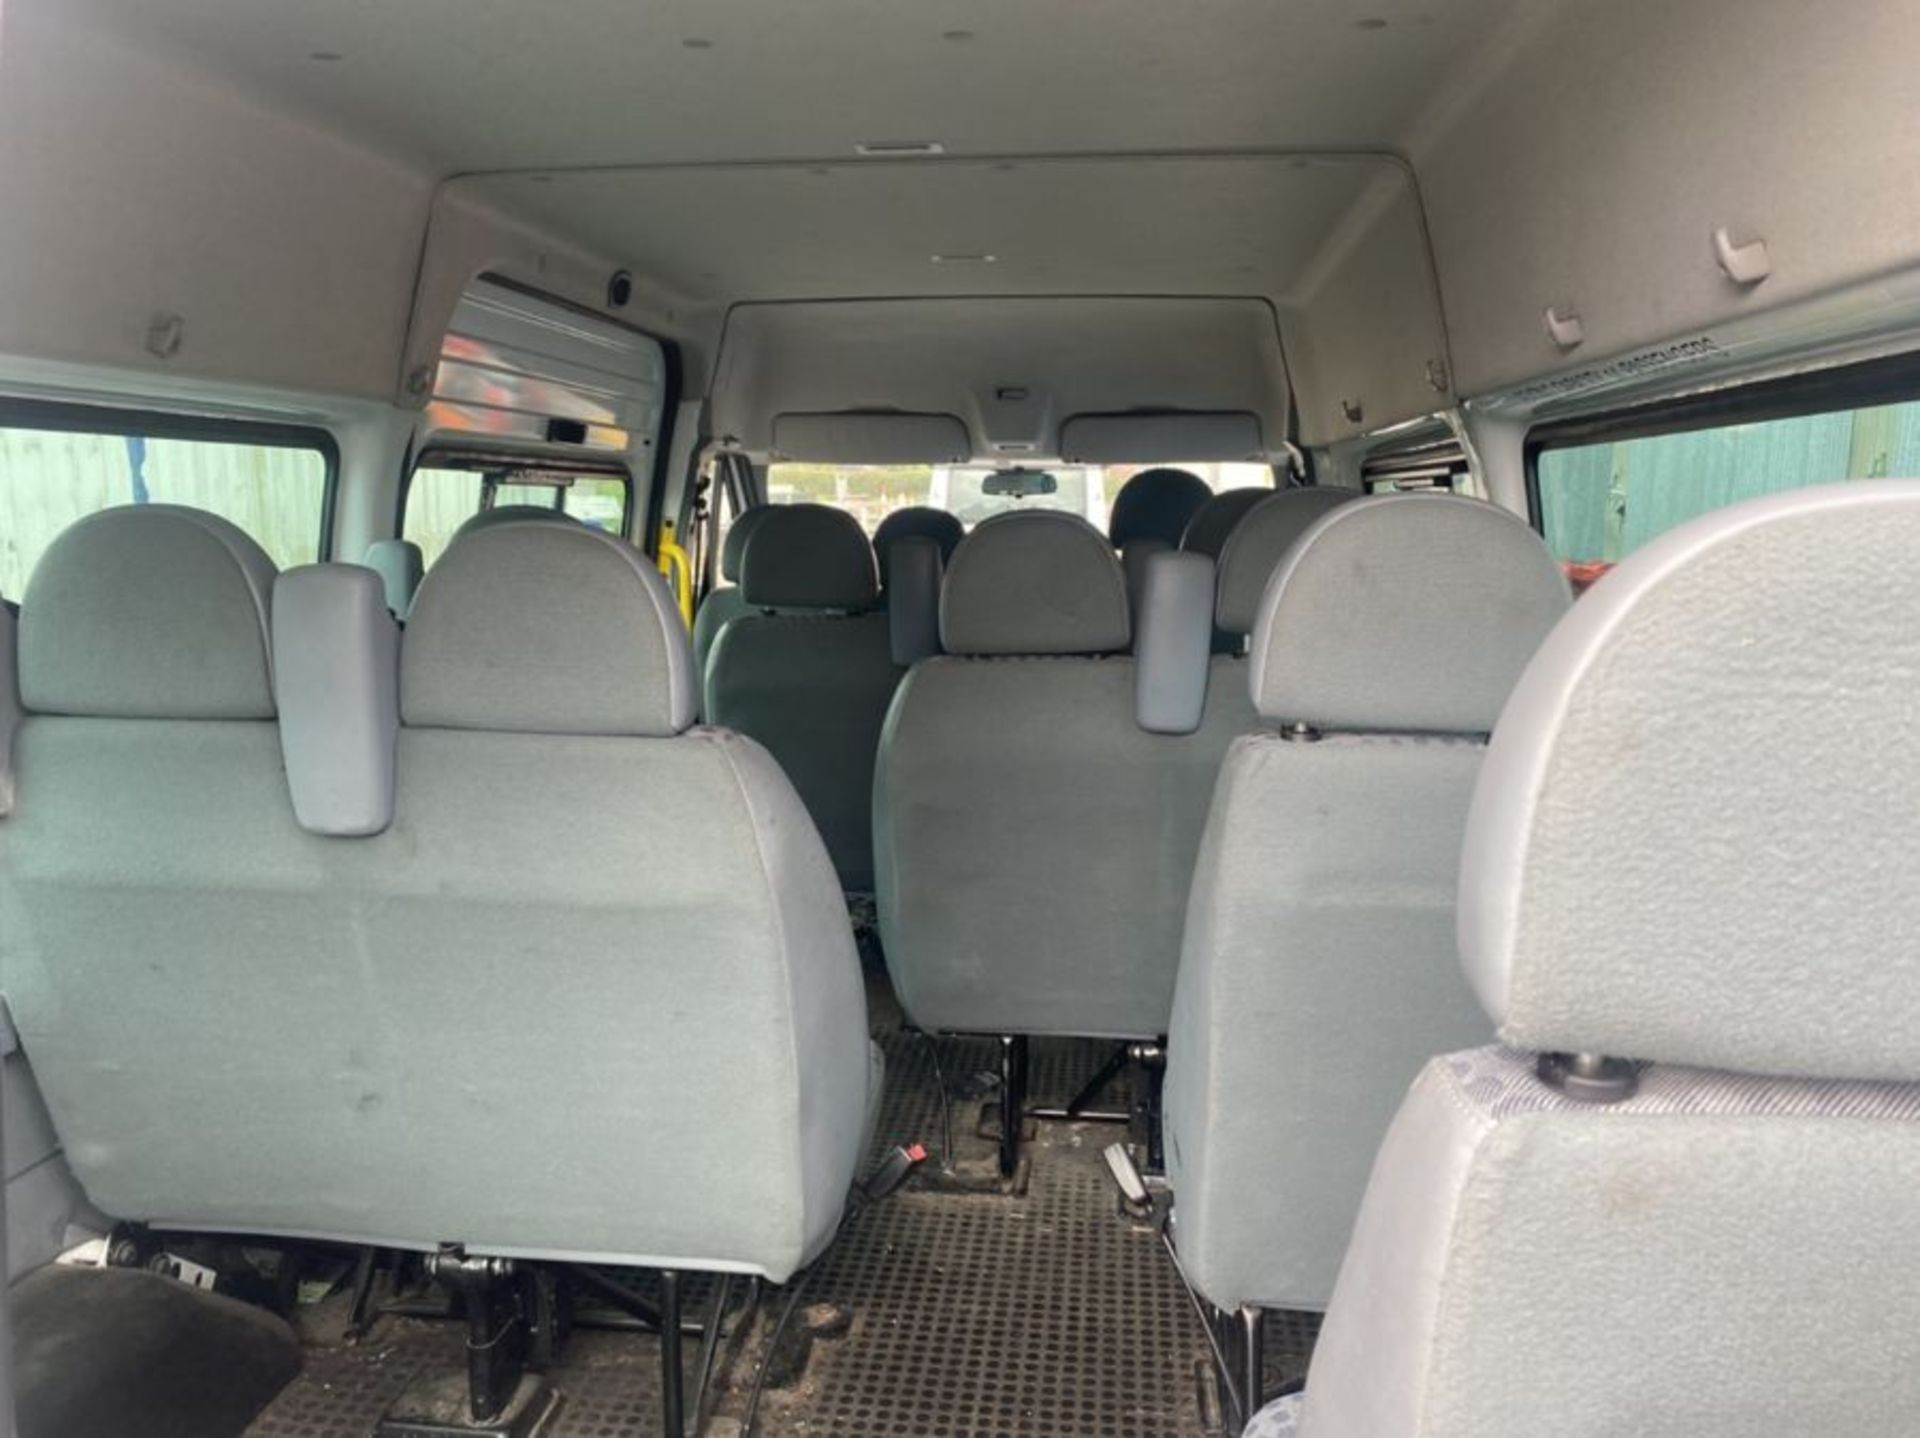 2009 WHITE FORD TRANSIT 2.4 15-SEATER MINI BUS (117,990KM) (TURNS ON AND DRIVING) (NO MOT, NO - Image 4 of 8